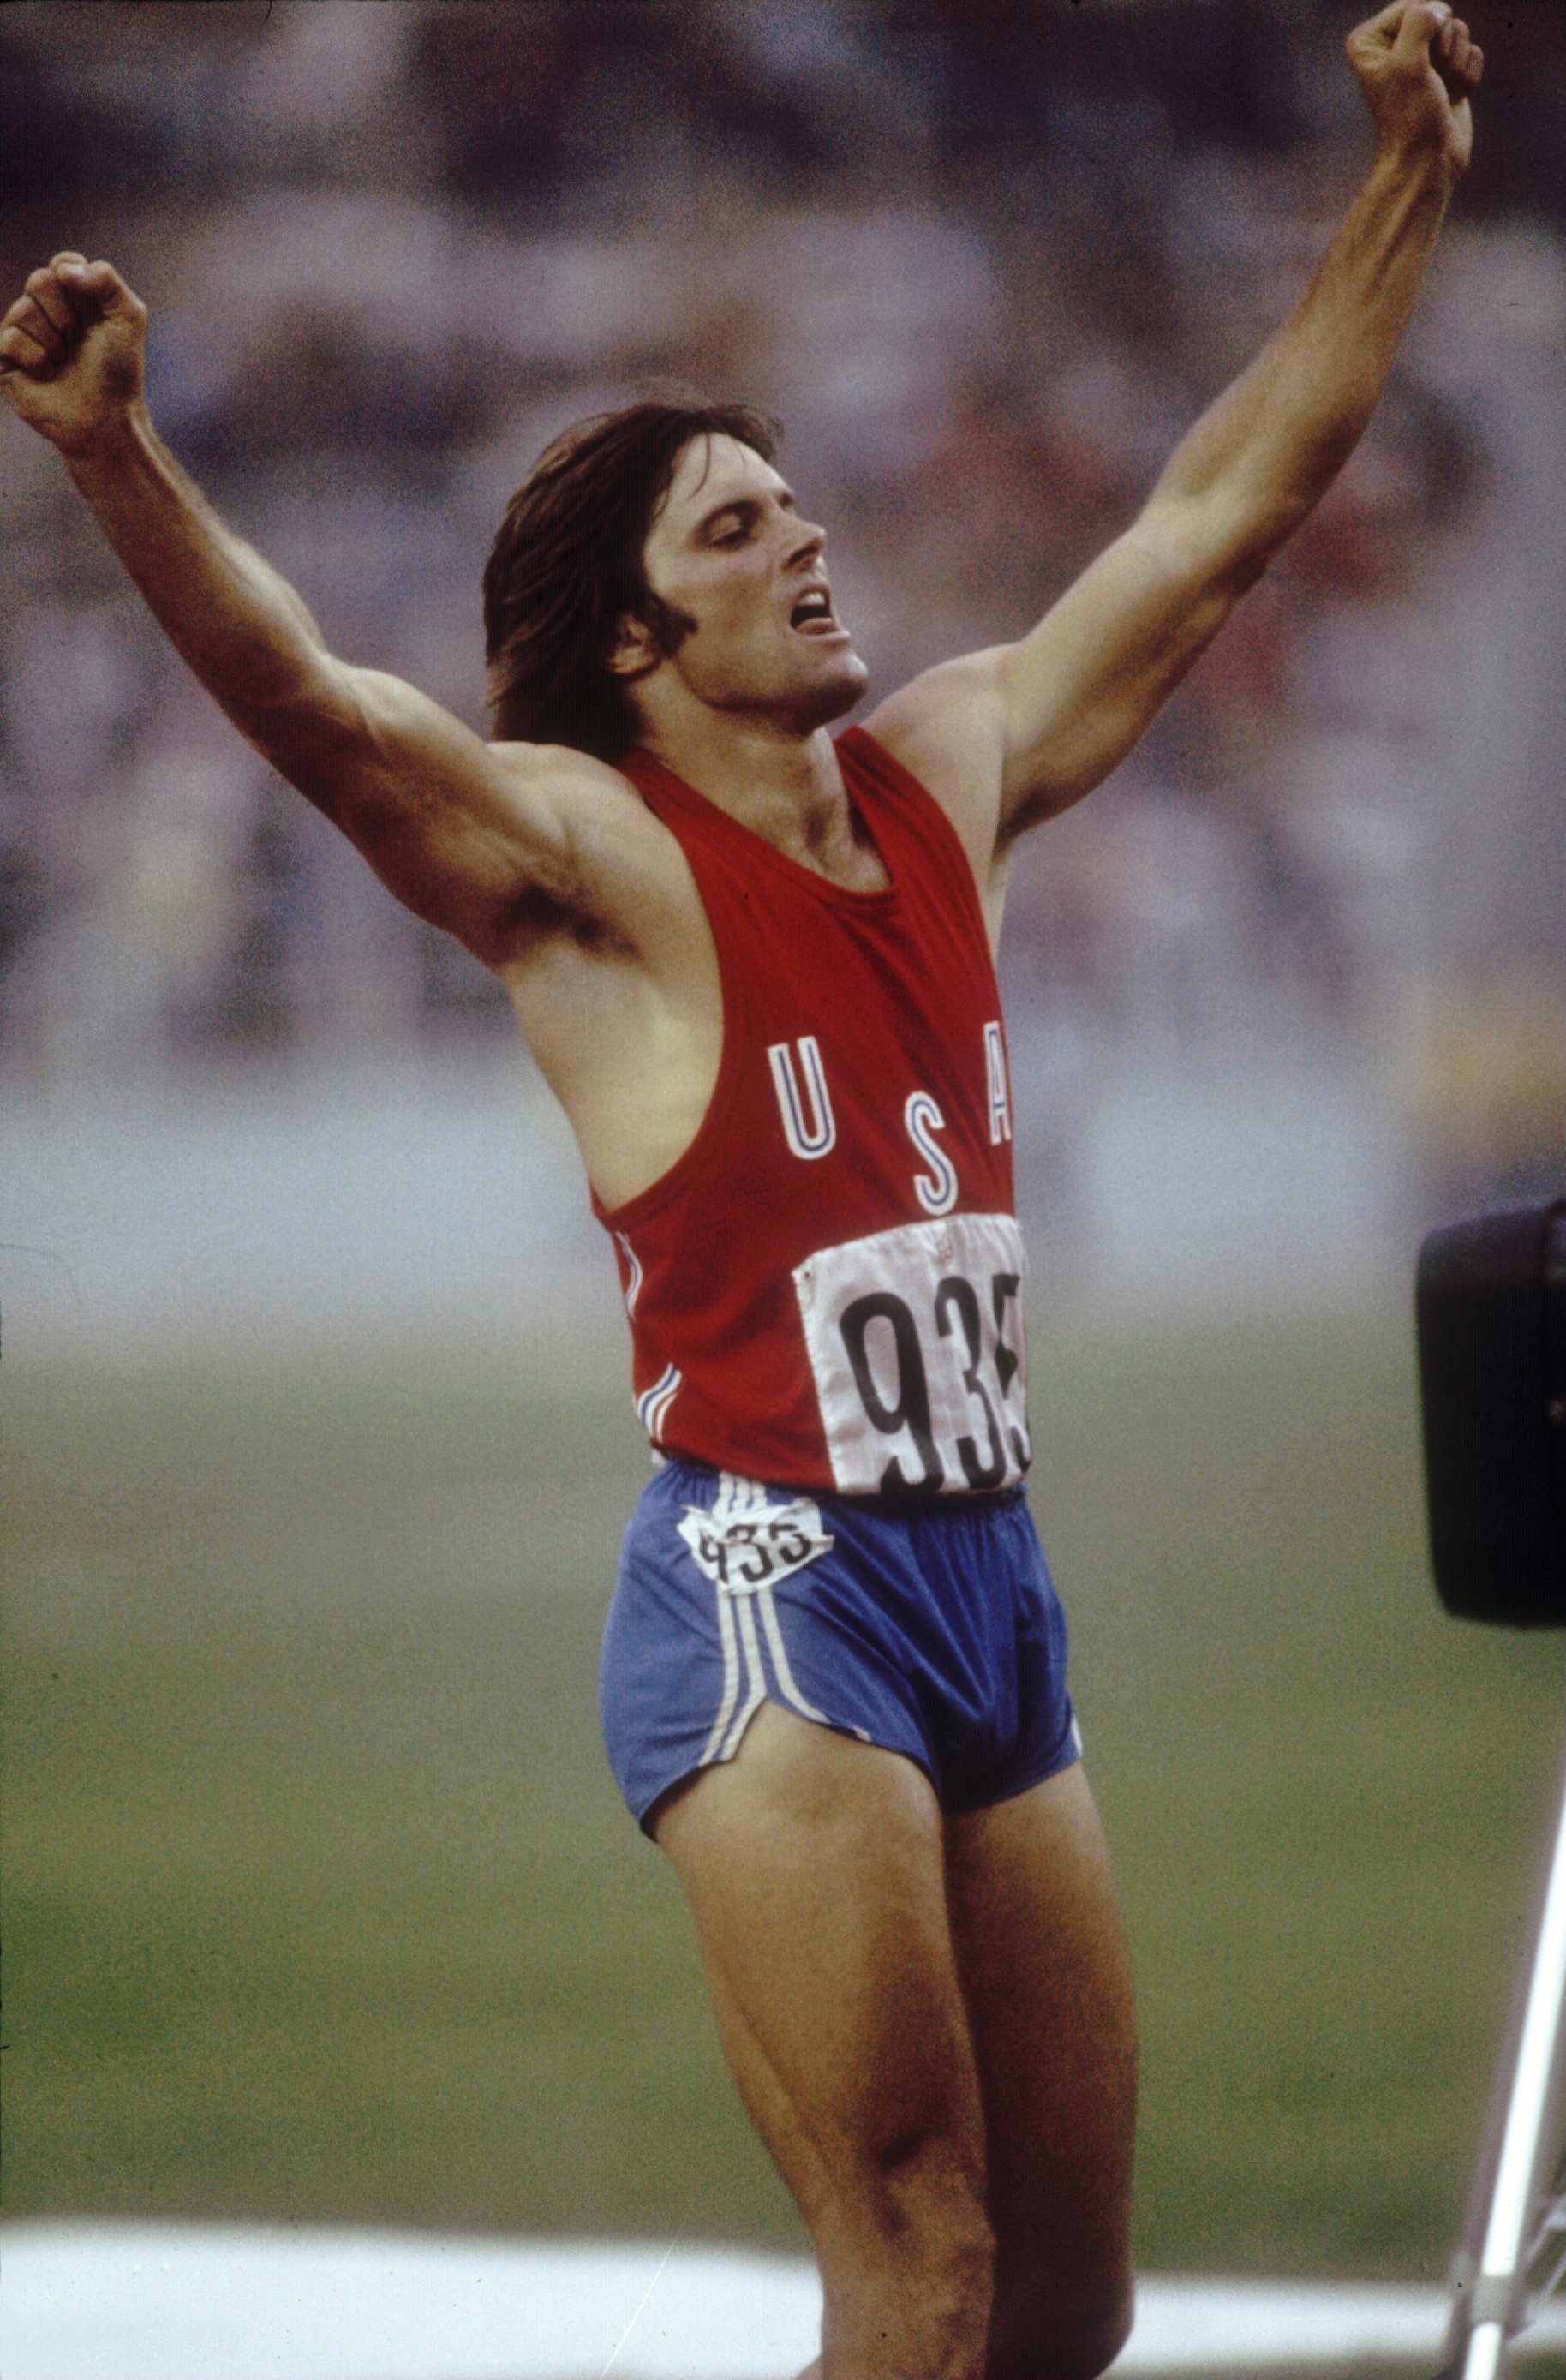 Bruce Jenner of the USA celebrates during his record setting performance in the decathlon in the 1976, Summer Olympics in Montreal, Canada | Photo: Getty Images